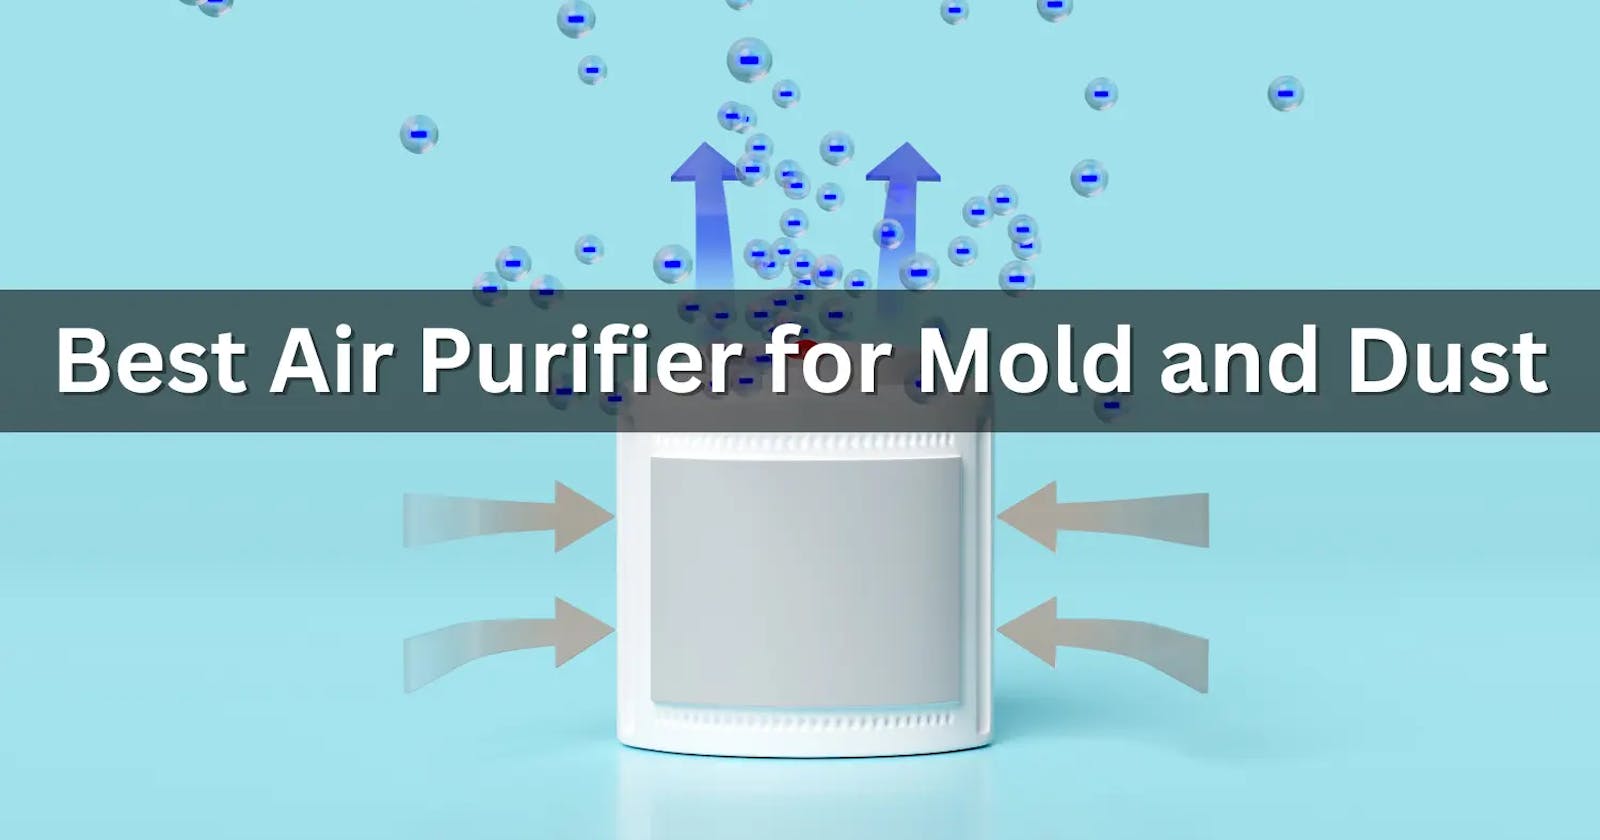 Best Air Purifier for Mold and Dust